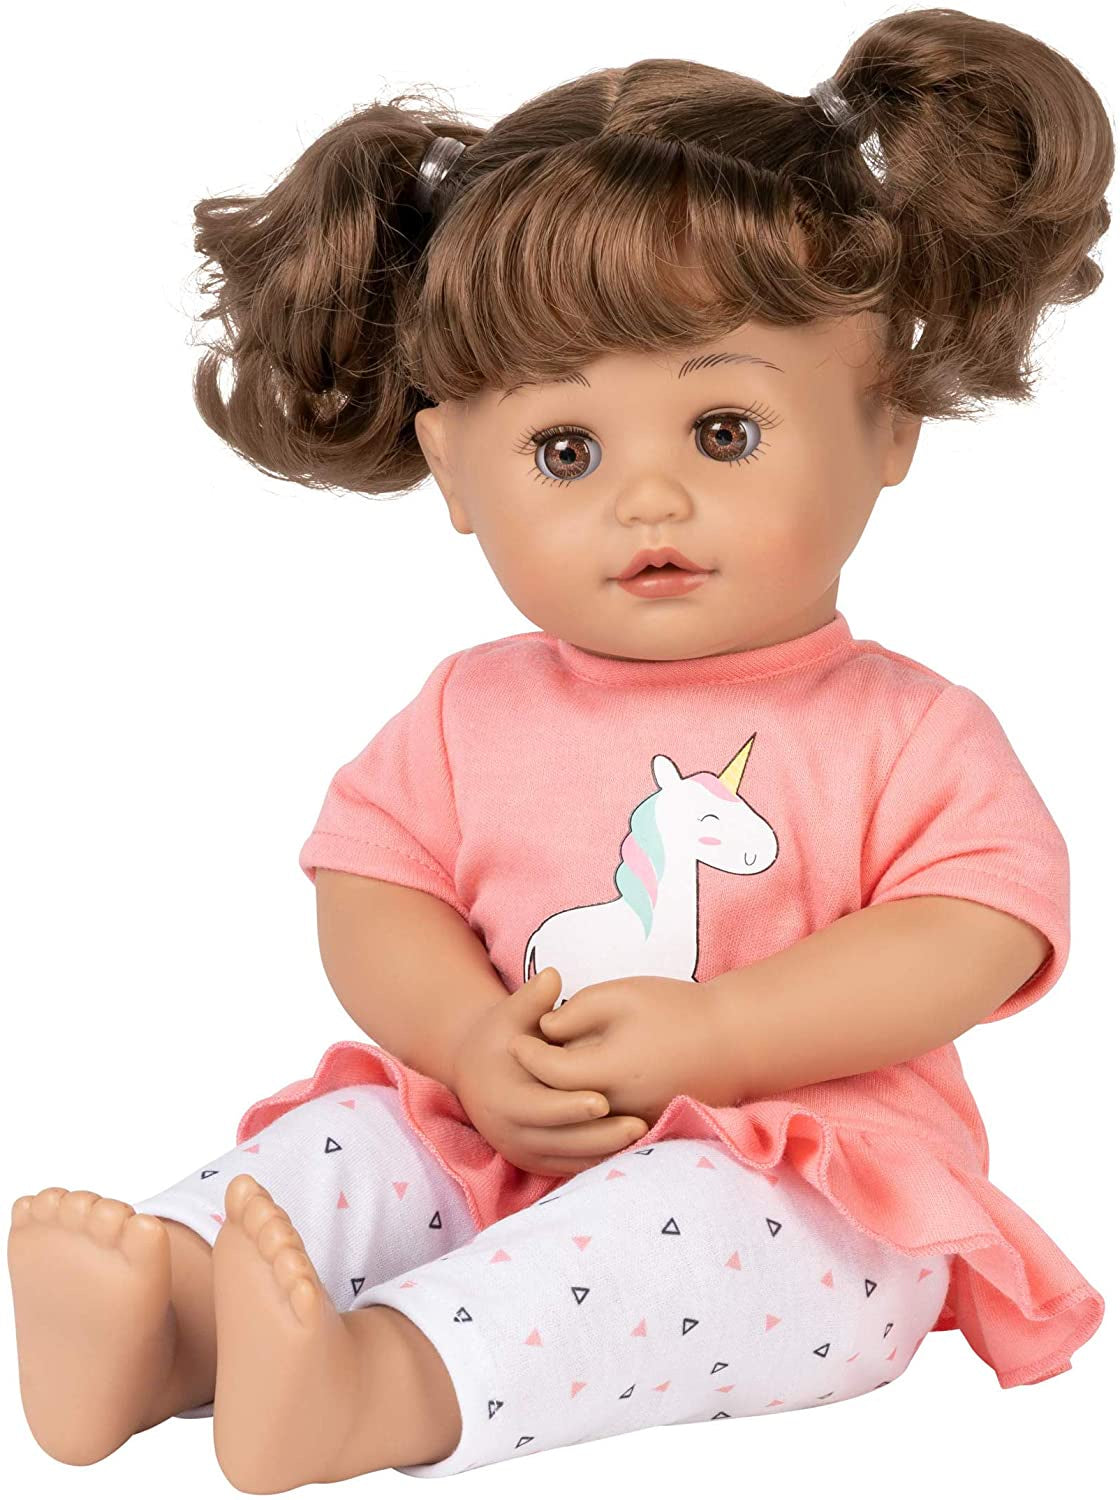 Adora My Cuddle & Coo Baby  Magic Touch Activated Doll w/ 5 Sounds